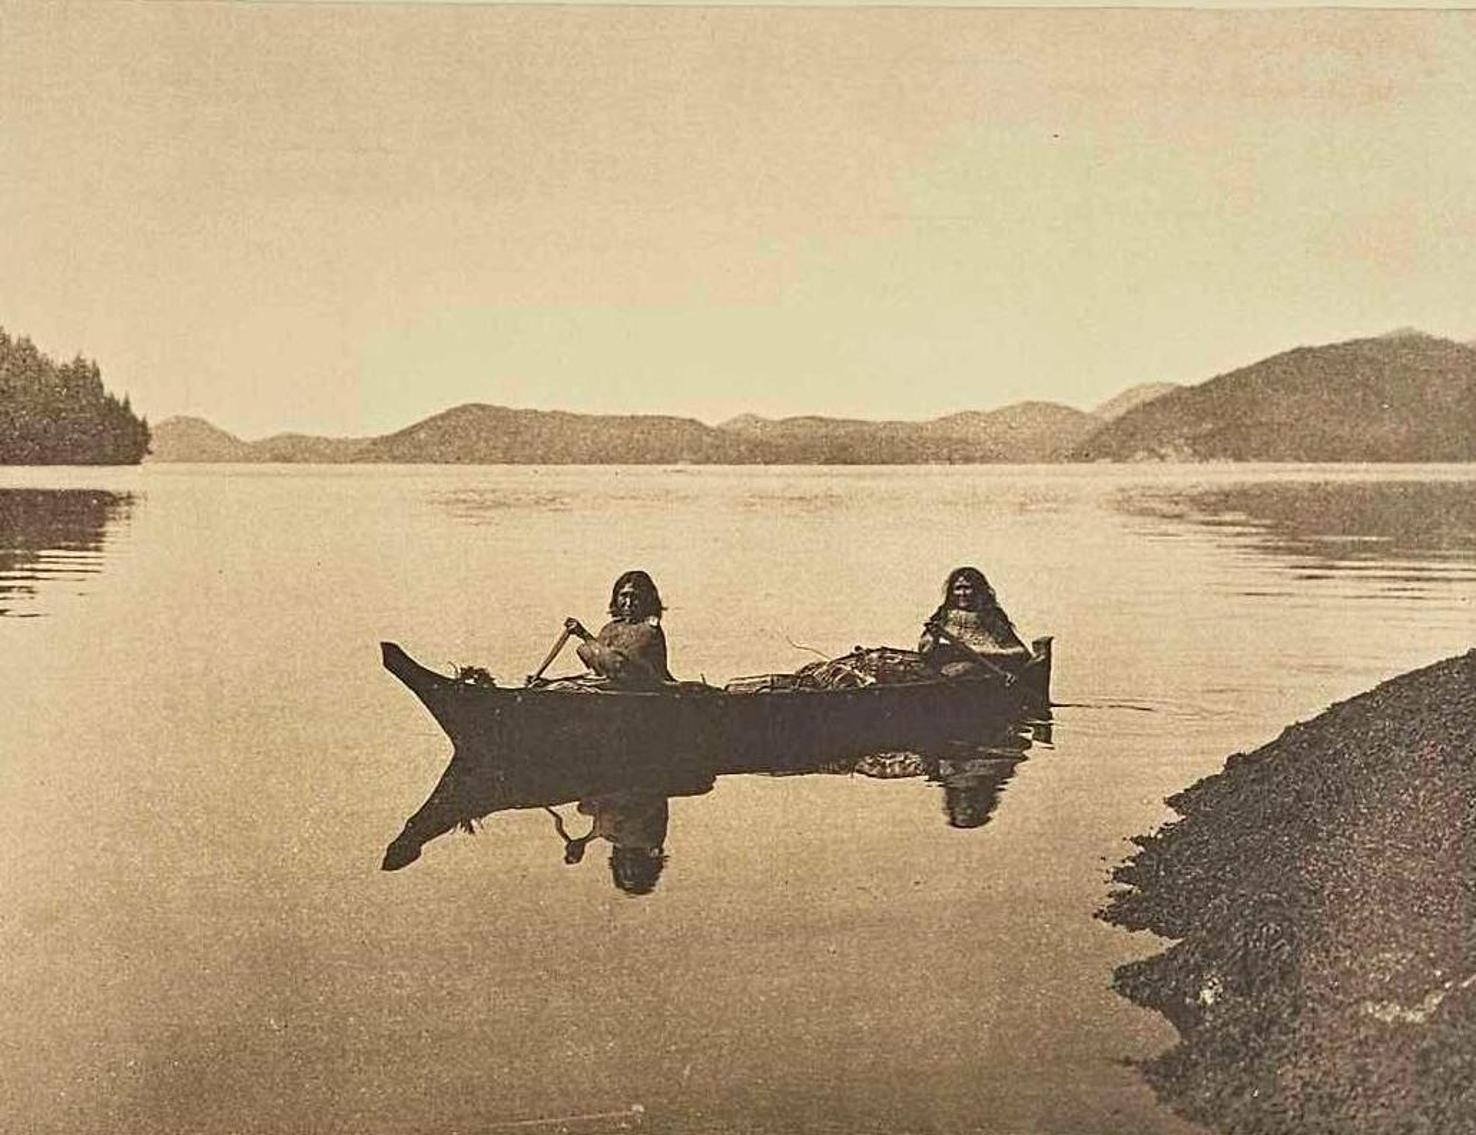 Artwork by Edward S. Curtis, Canoeing on Clayoquot Sound, Made of hand-pulled brown-ink photogravure